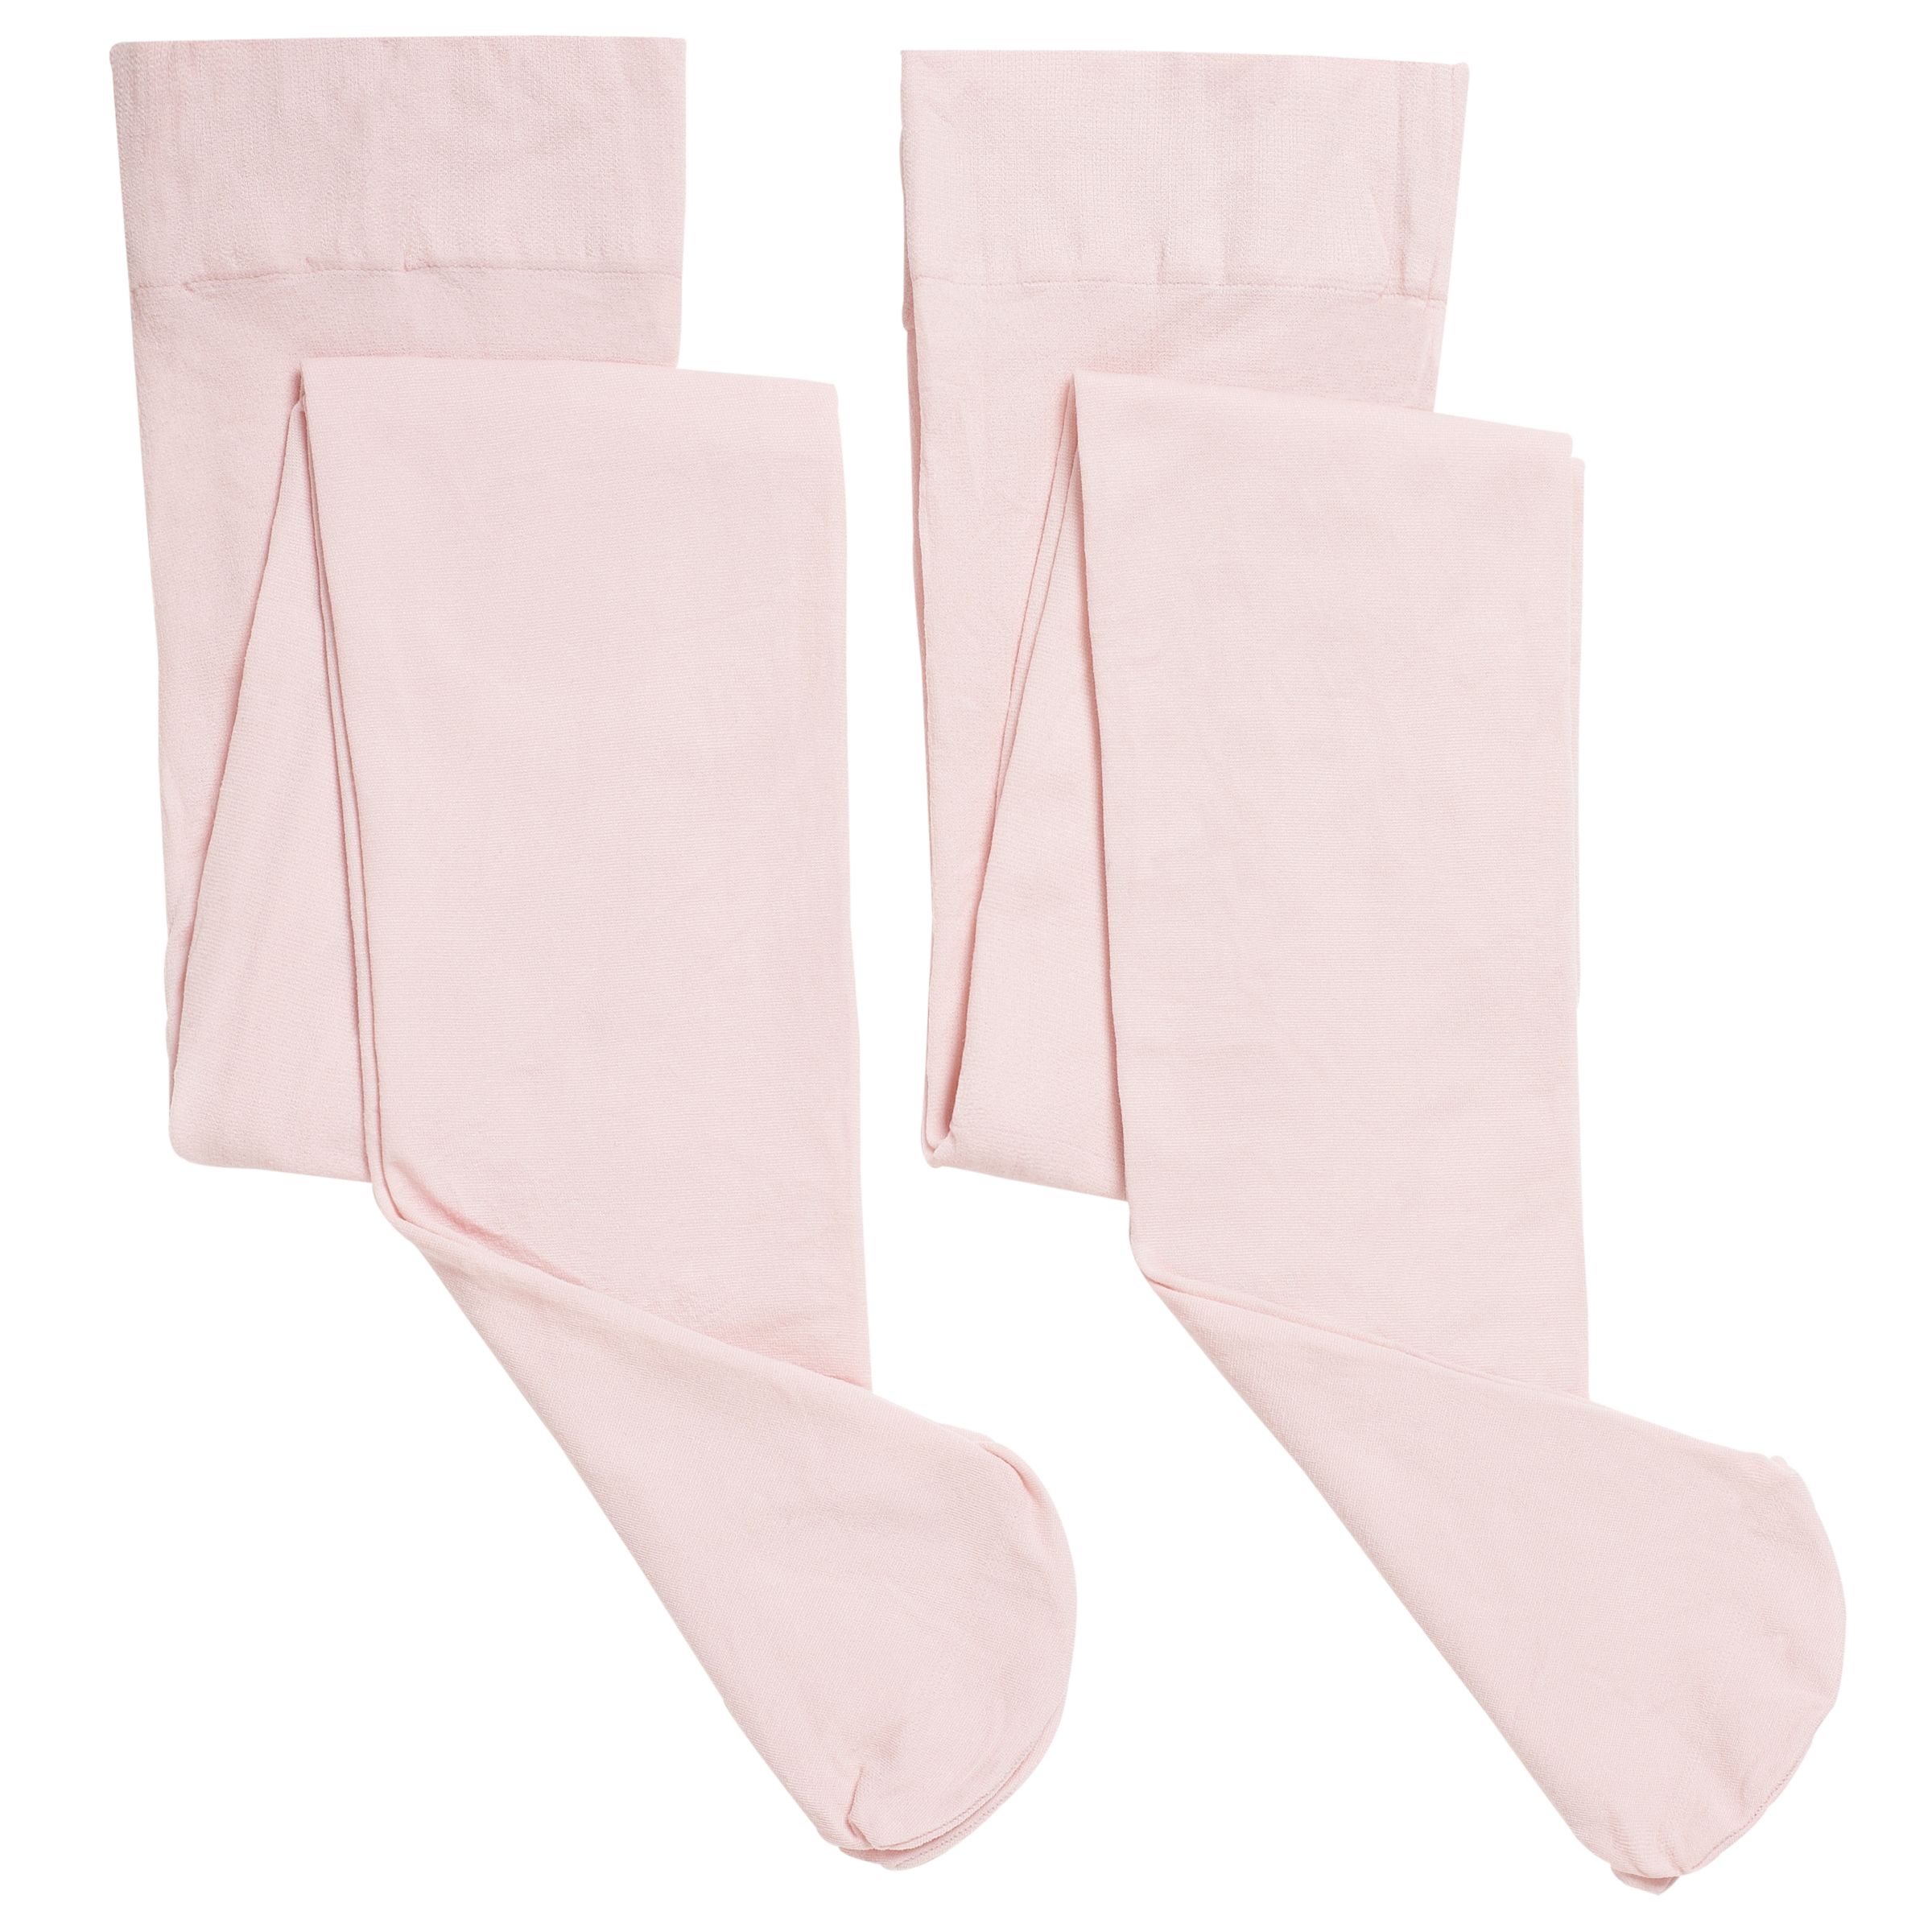 John Lewis ANYDAY Kids' Opaque Tights, Pack of 2, Pink, 2-3 Years